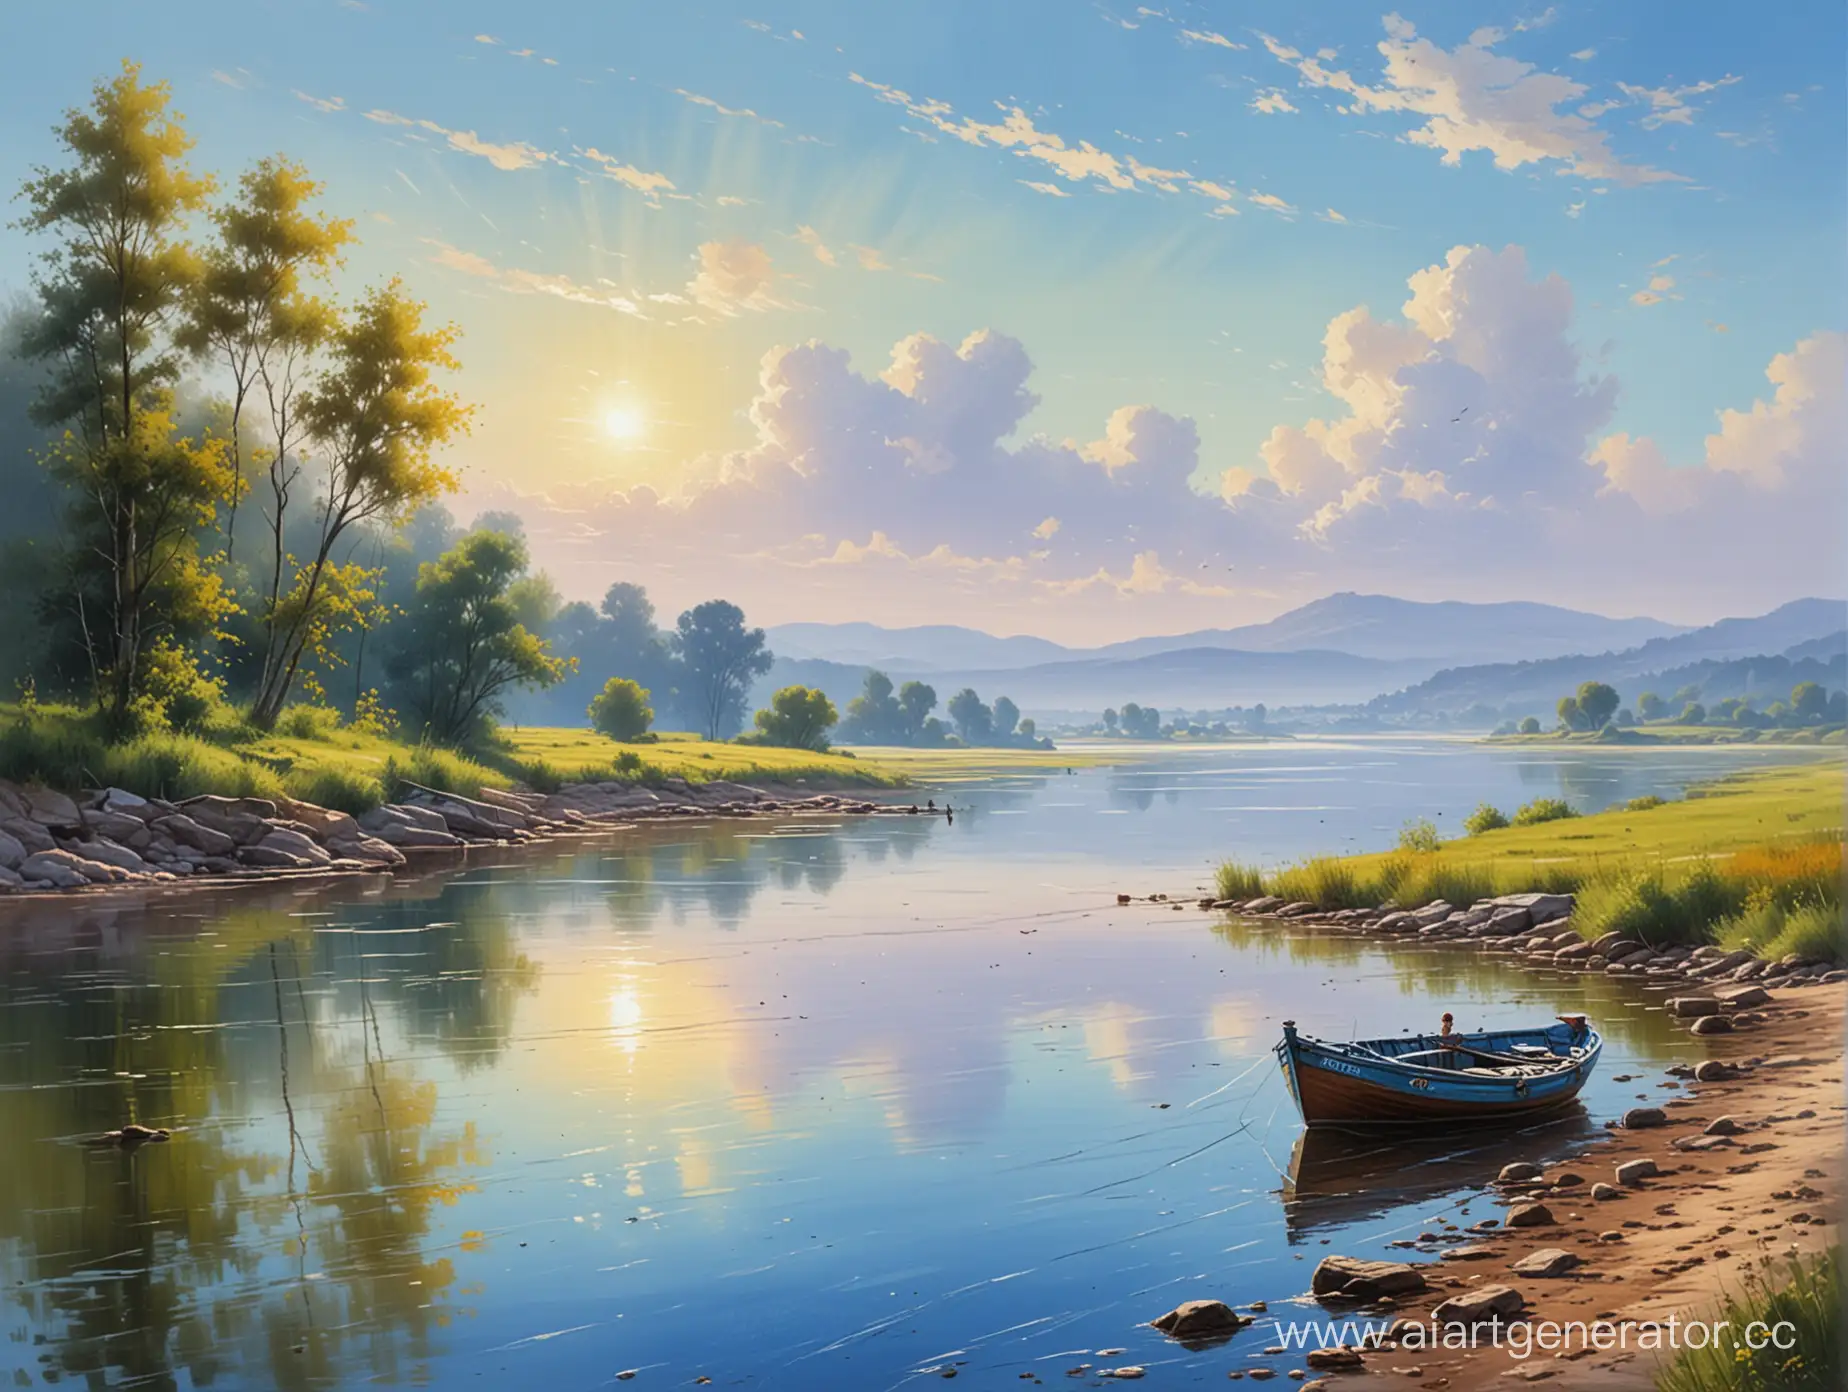 Morning-Serenity-Vibrant-Blue-Sky-Over-a-Picturesque-River-with-a-Fishing-Boat